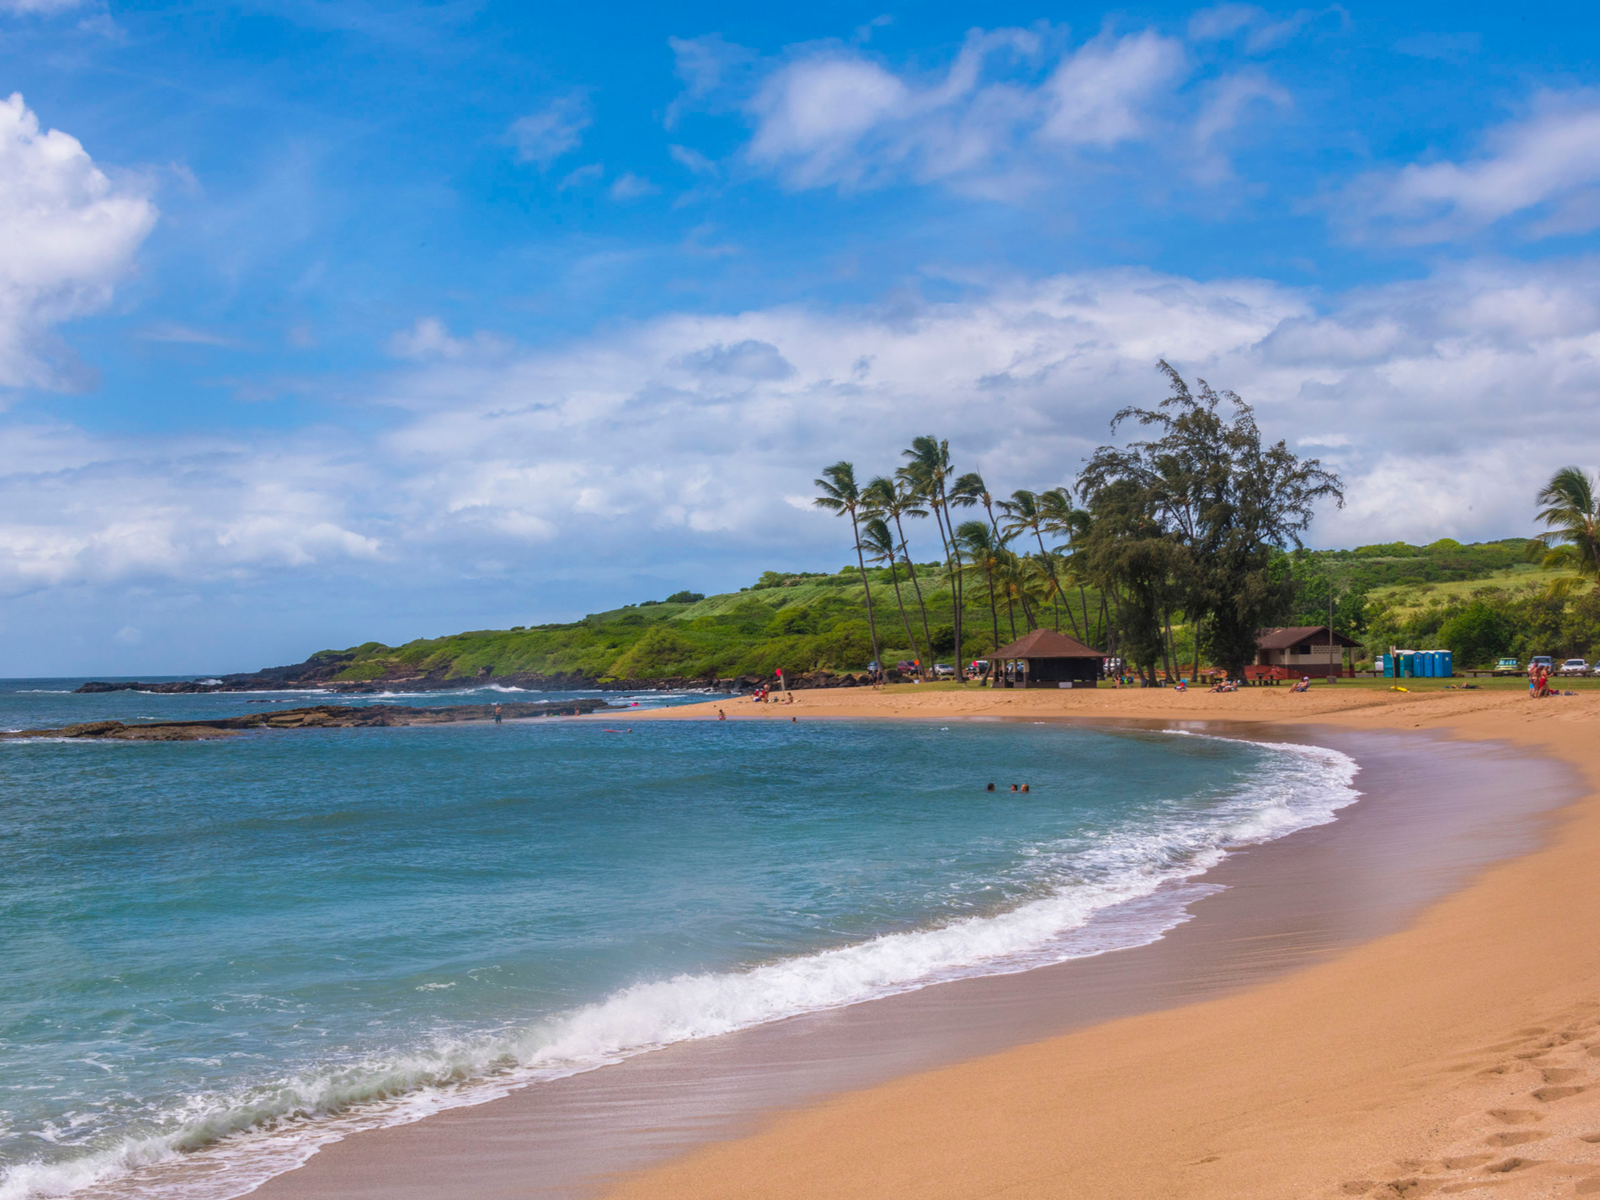 Visitors enjoying the calm waves at Salt Pond Beach with two beach houses near a group of palm trees, one of the best snorkeling spots in Kauai